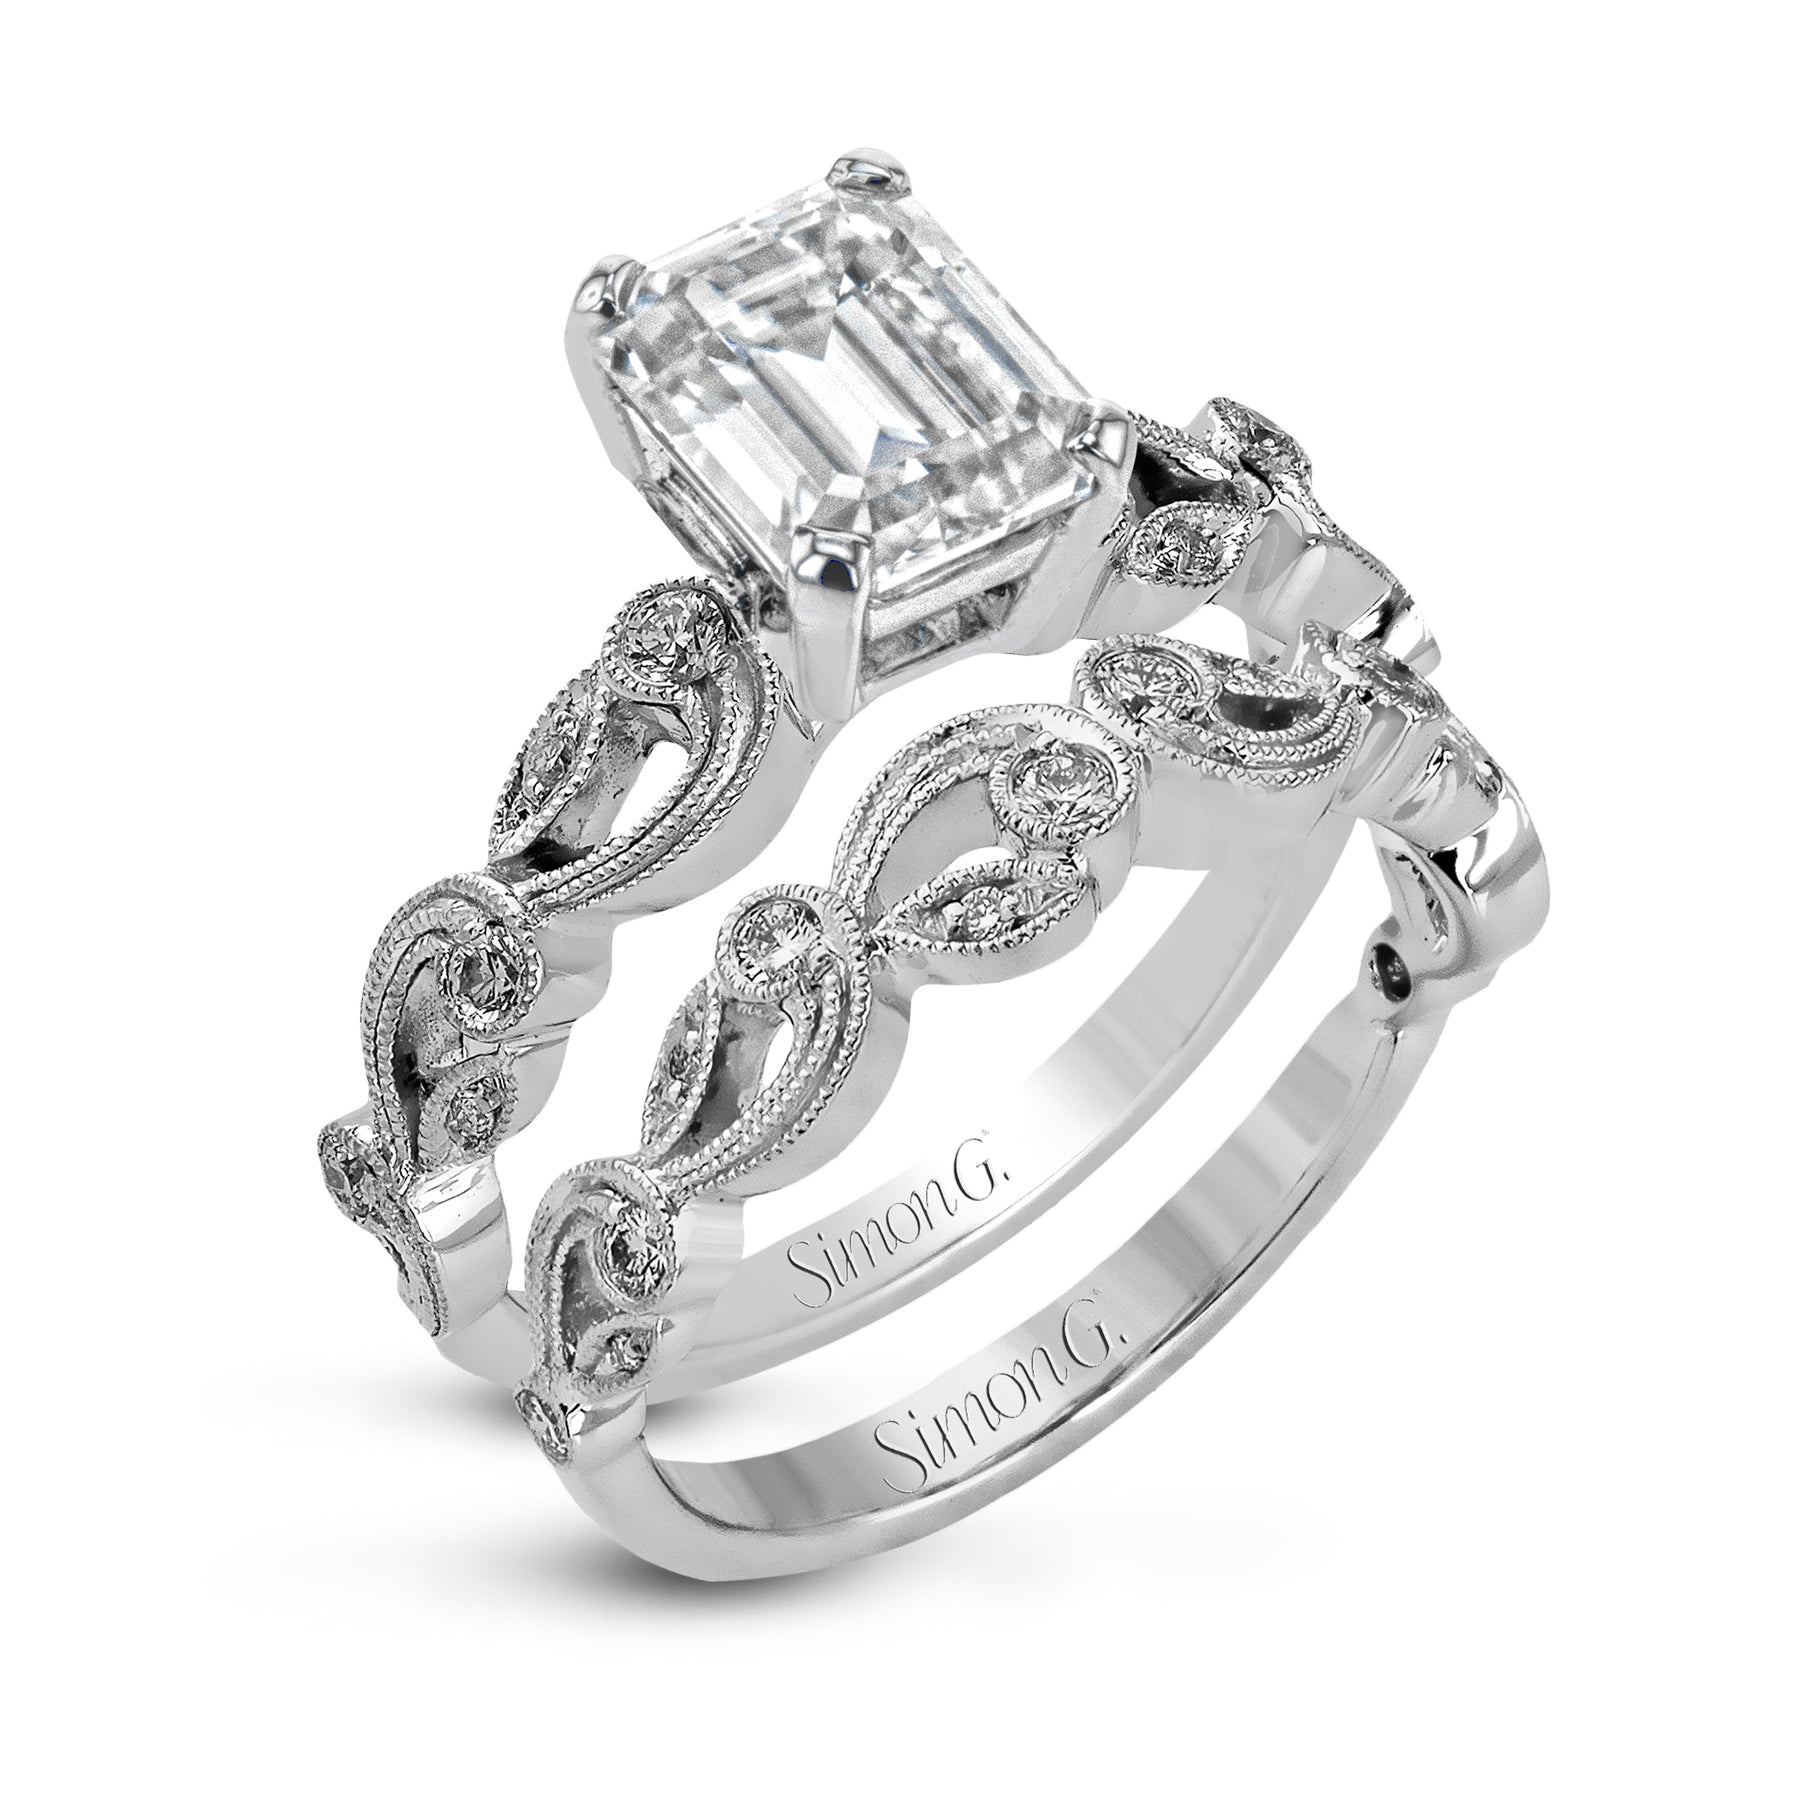 Emerald-cut Trellis Engagement Ring & Matching Wedding Band in 18k Gold with Diamonds TR473-EM